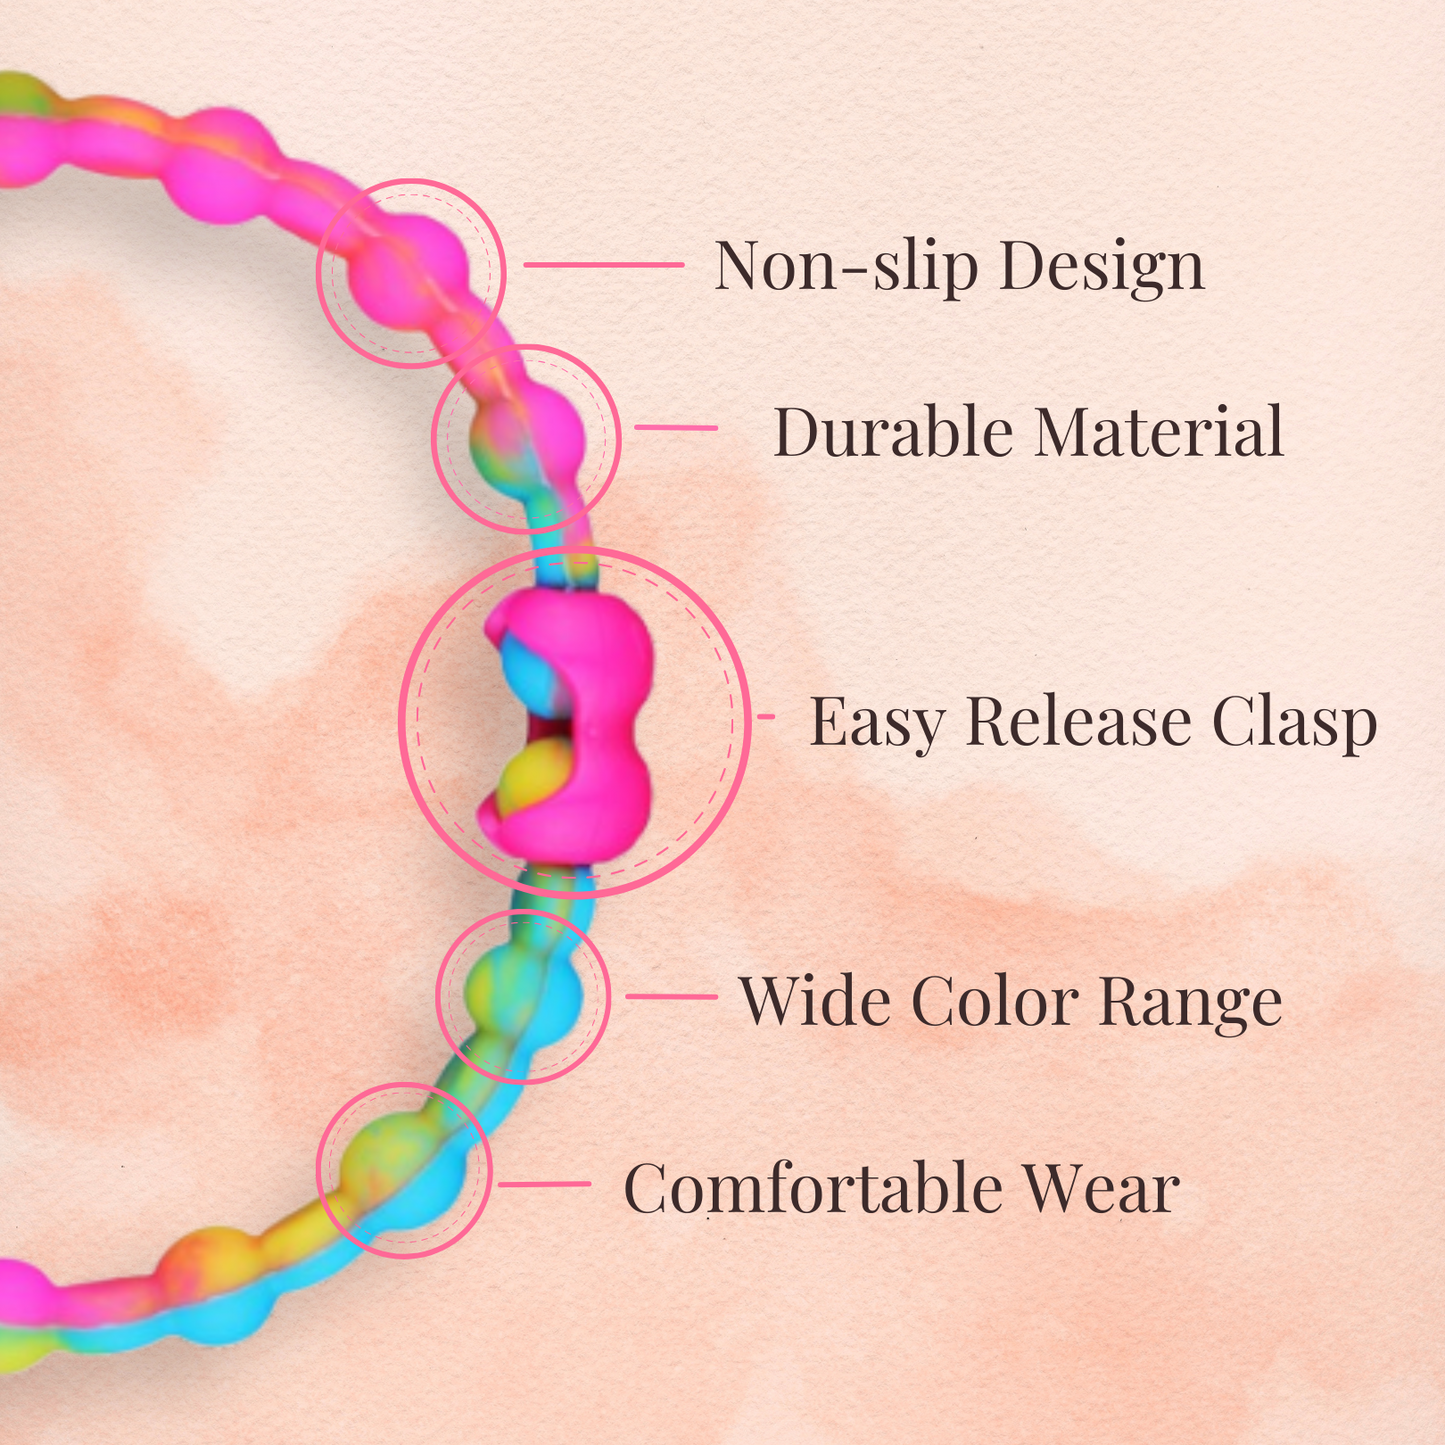 Mystic Night Pack Hair Ties (8 Pack): Enigmatic Beauty for Every Look